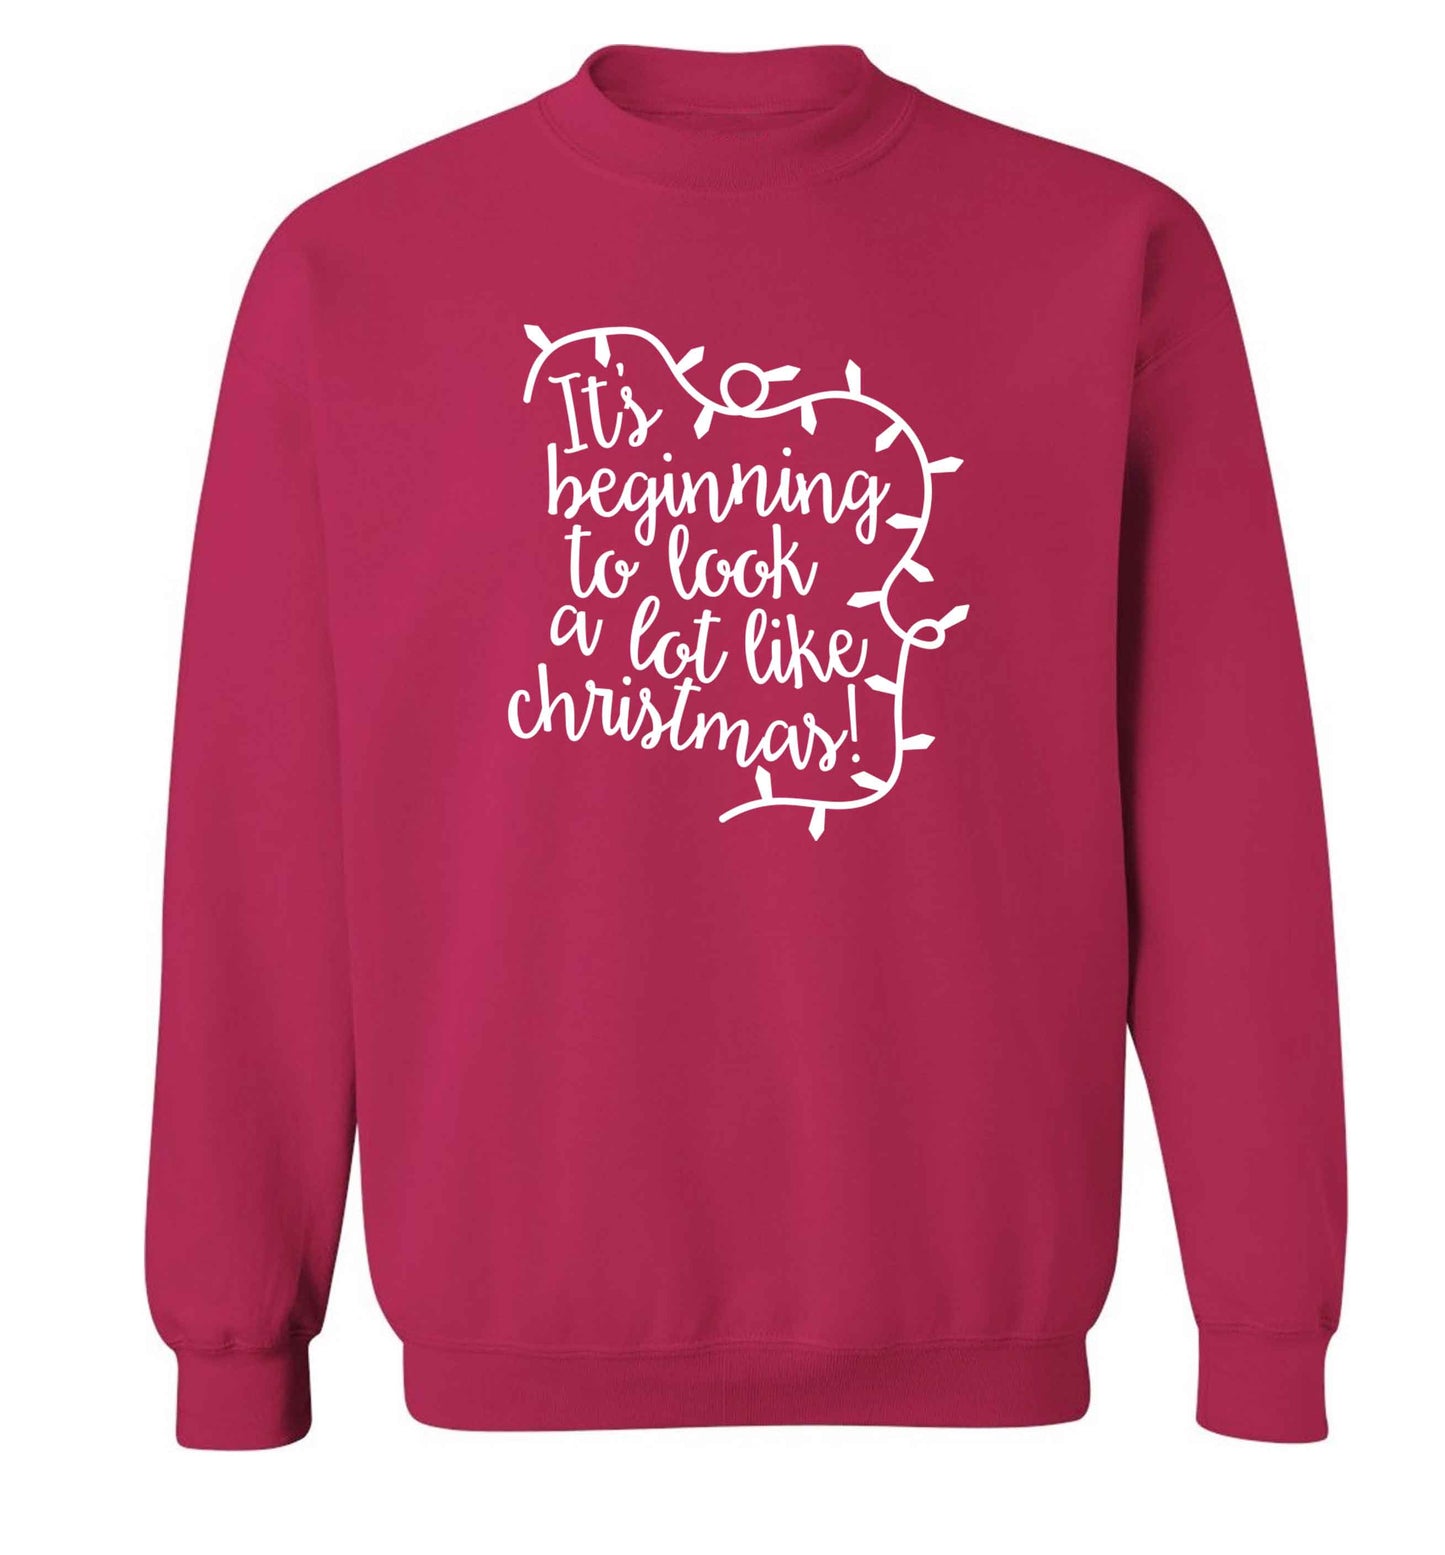 It's beginning to look a lot like Christmas adult's unisex pink sweater 2XL